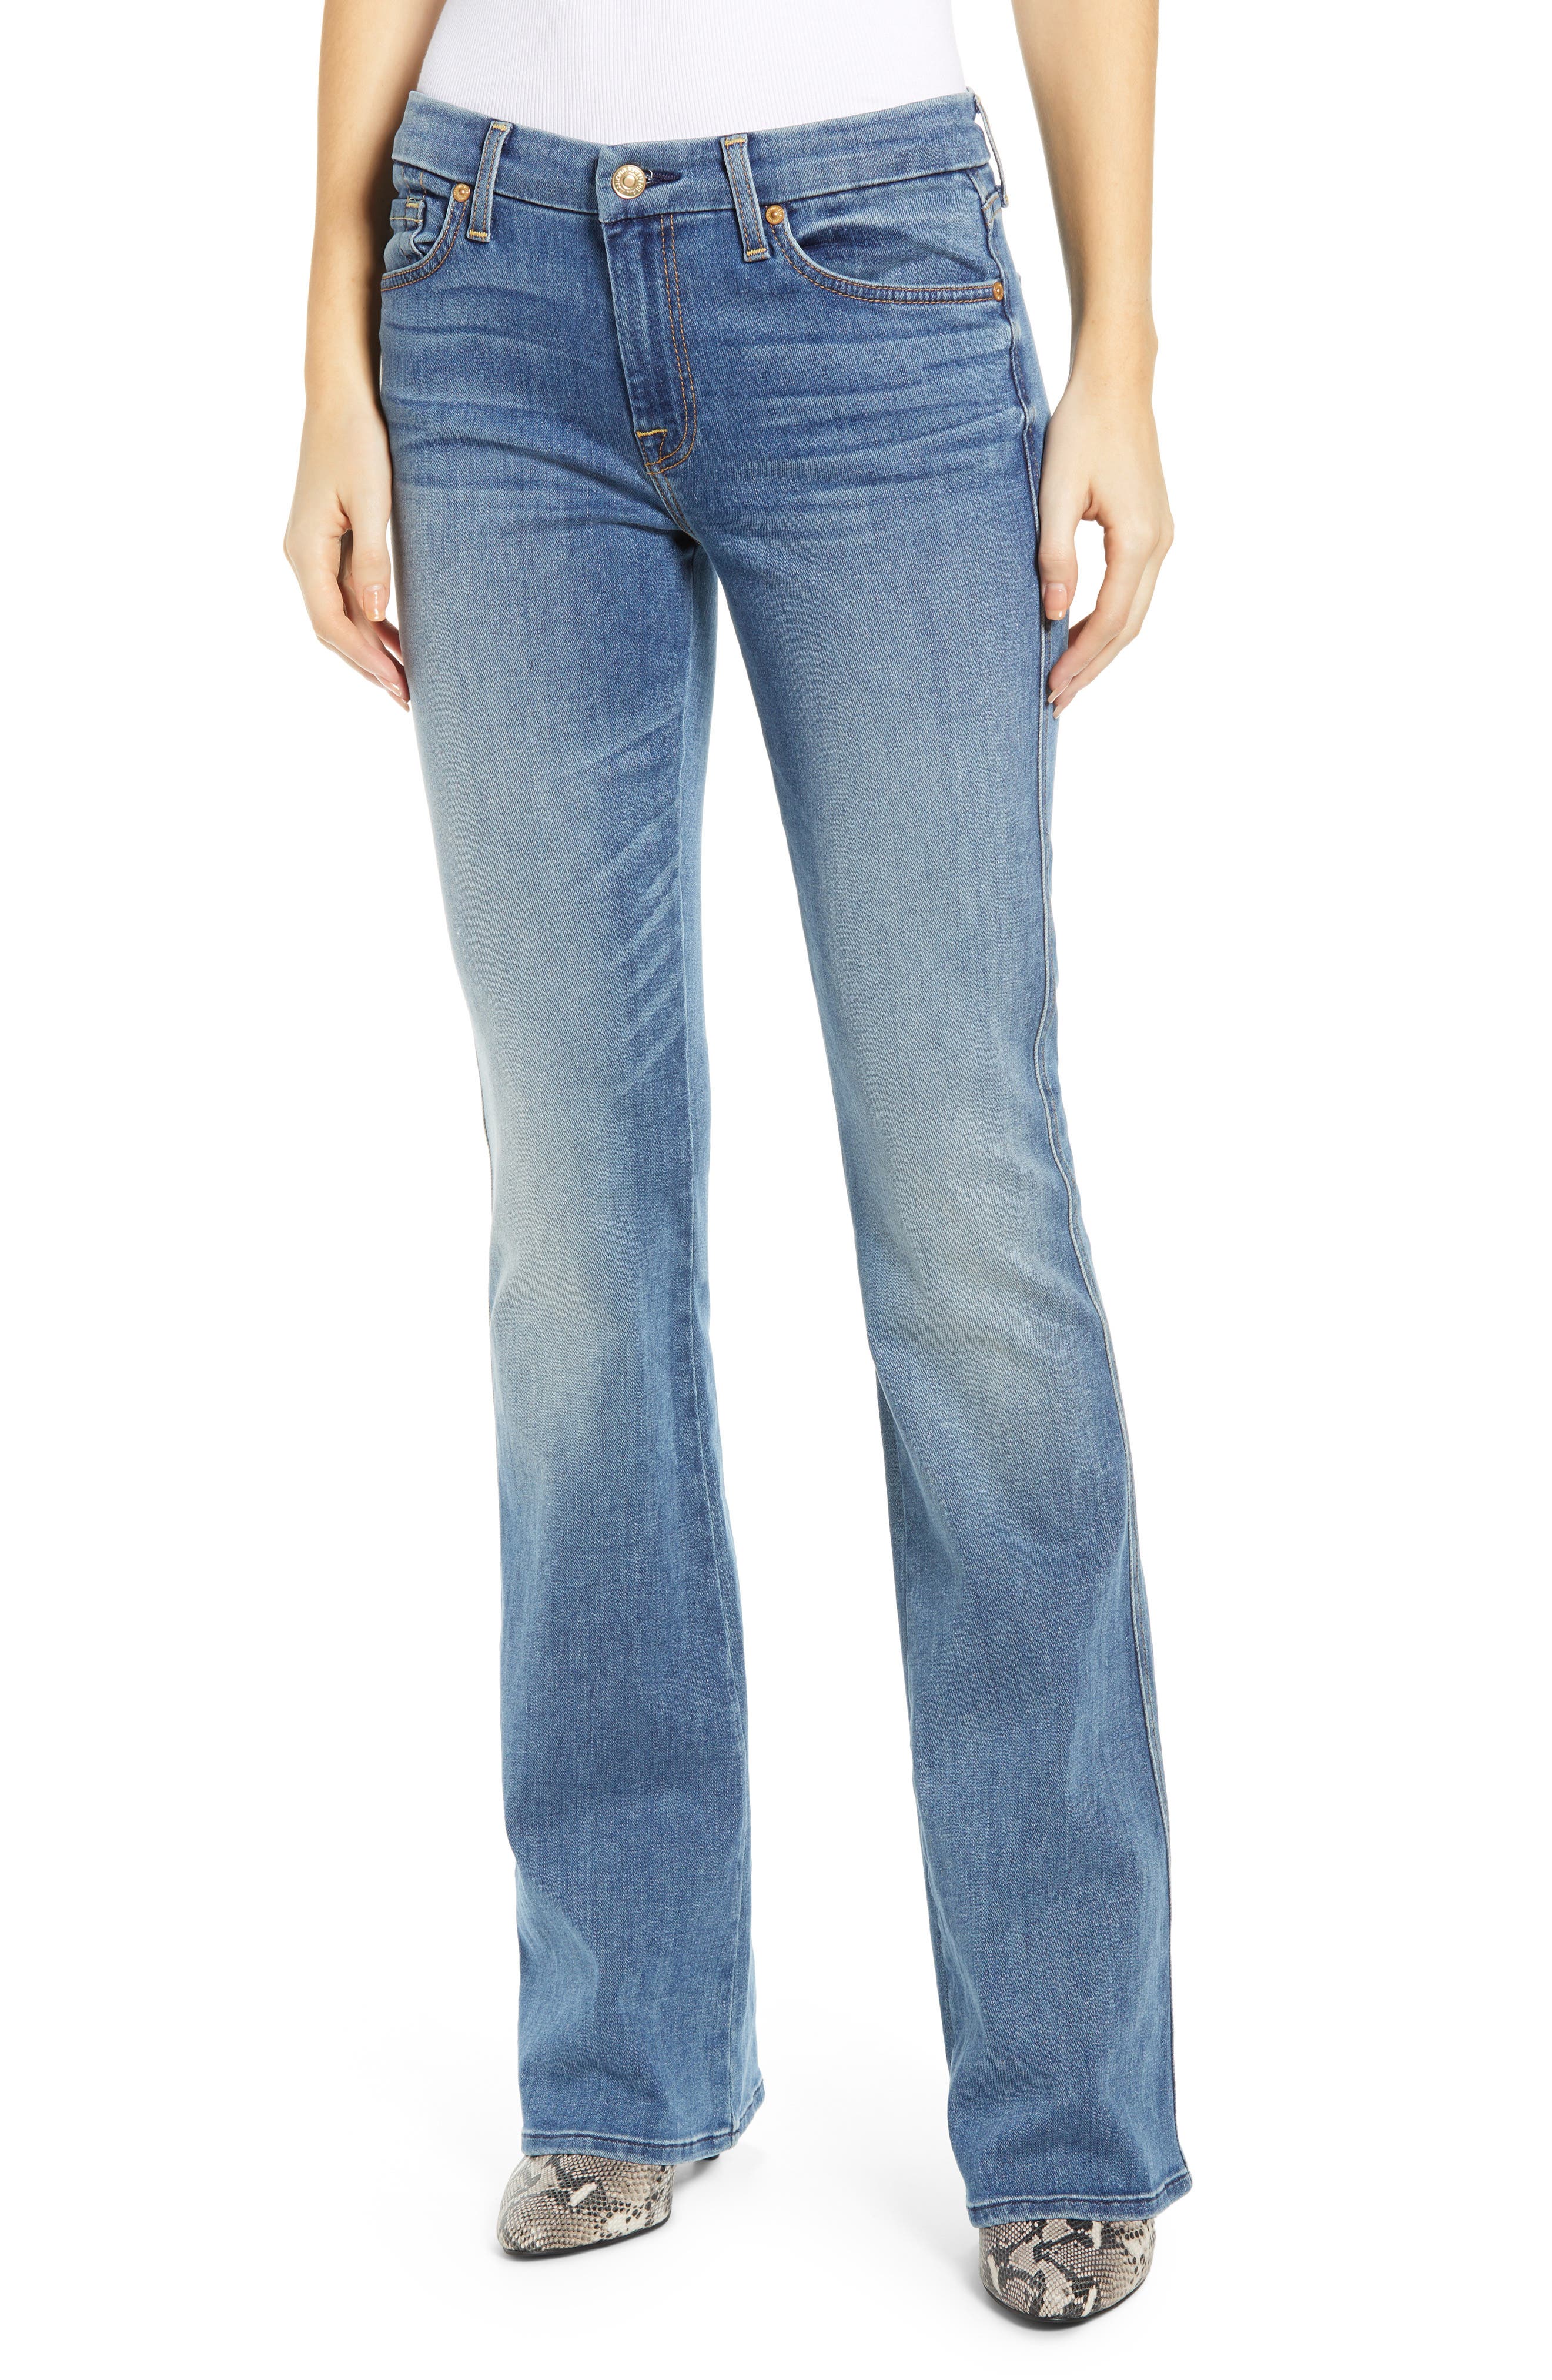 Women's 7 For All Mankind Jeans